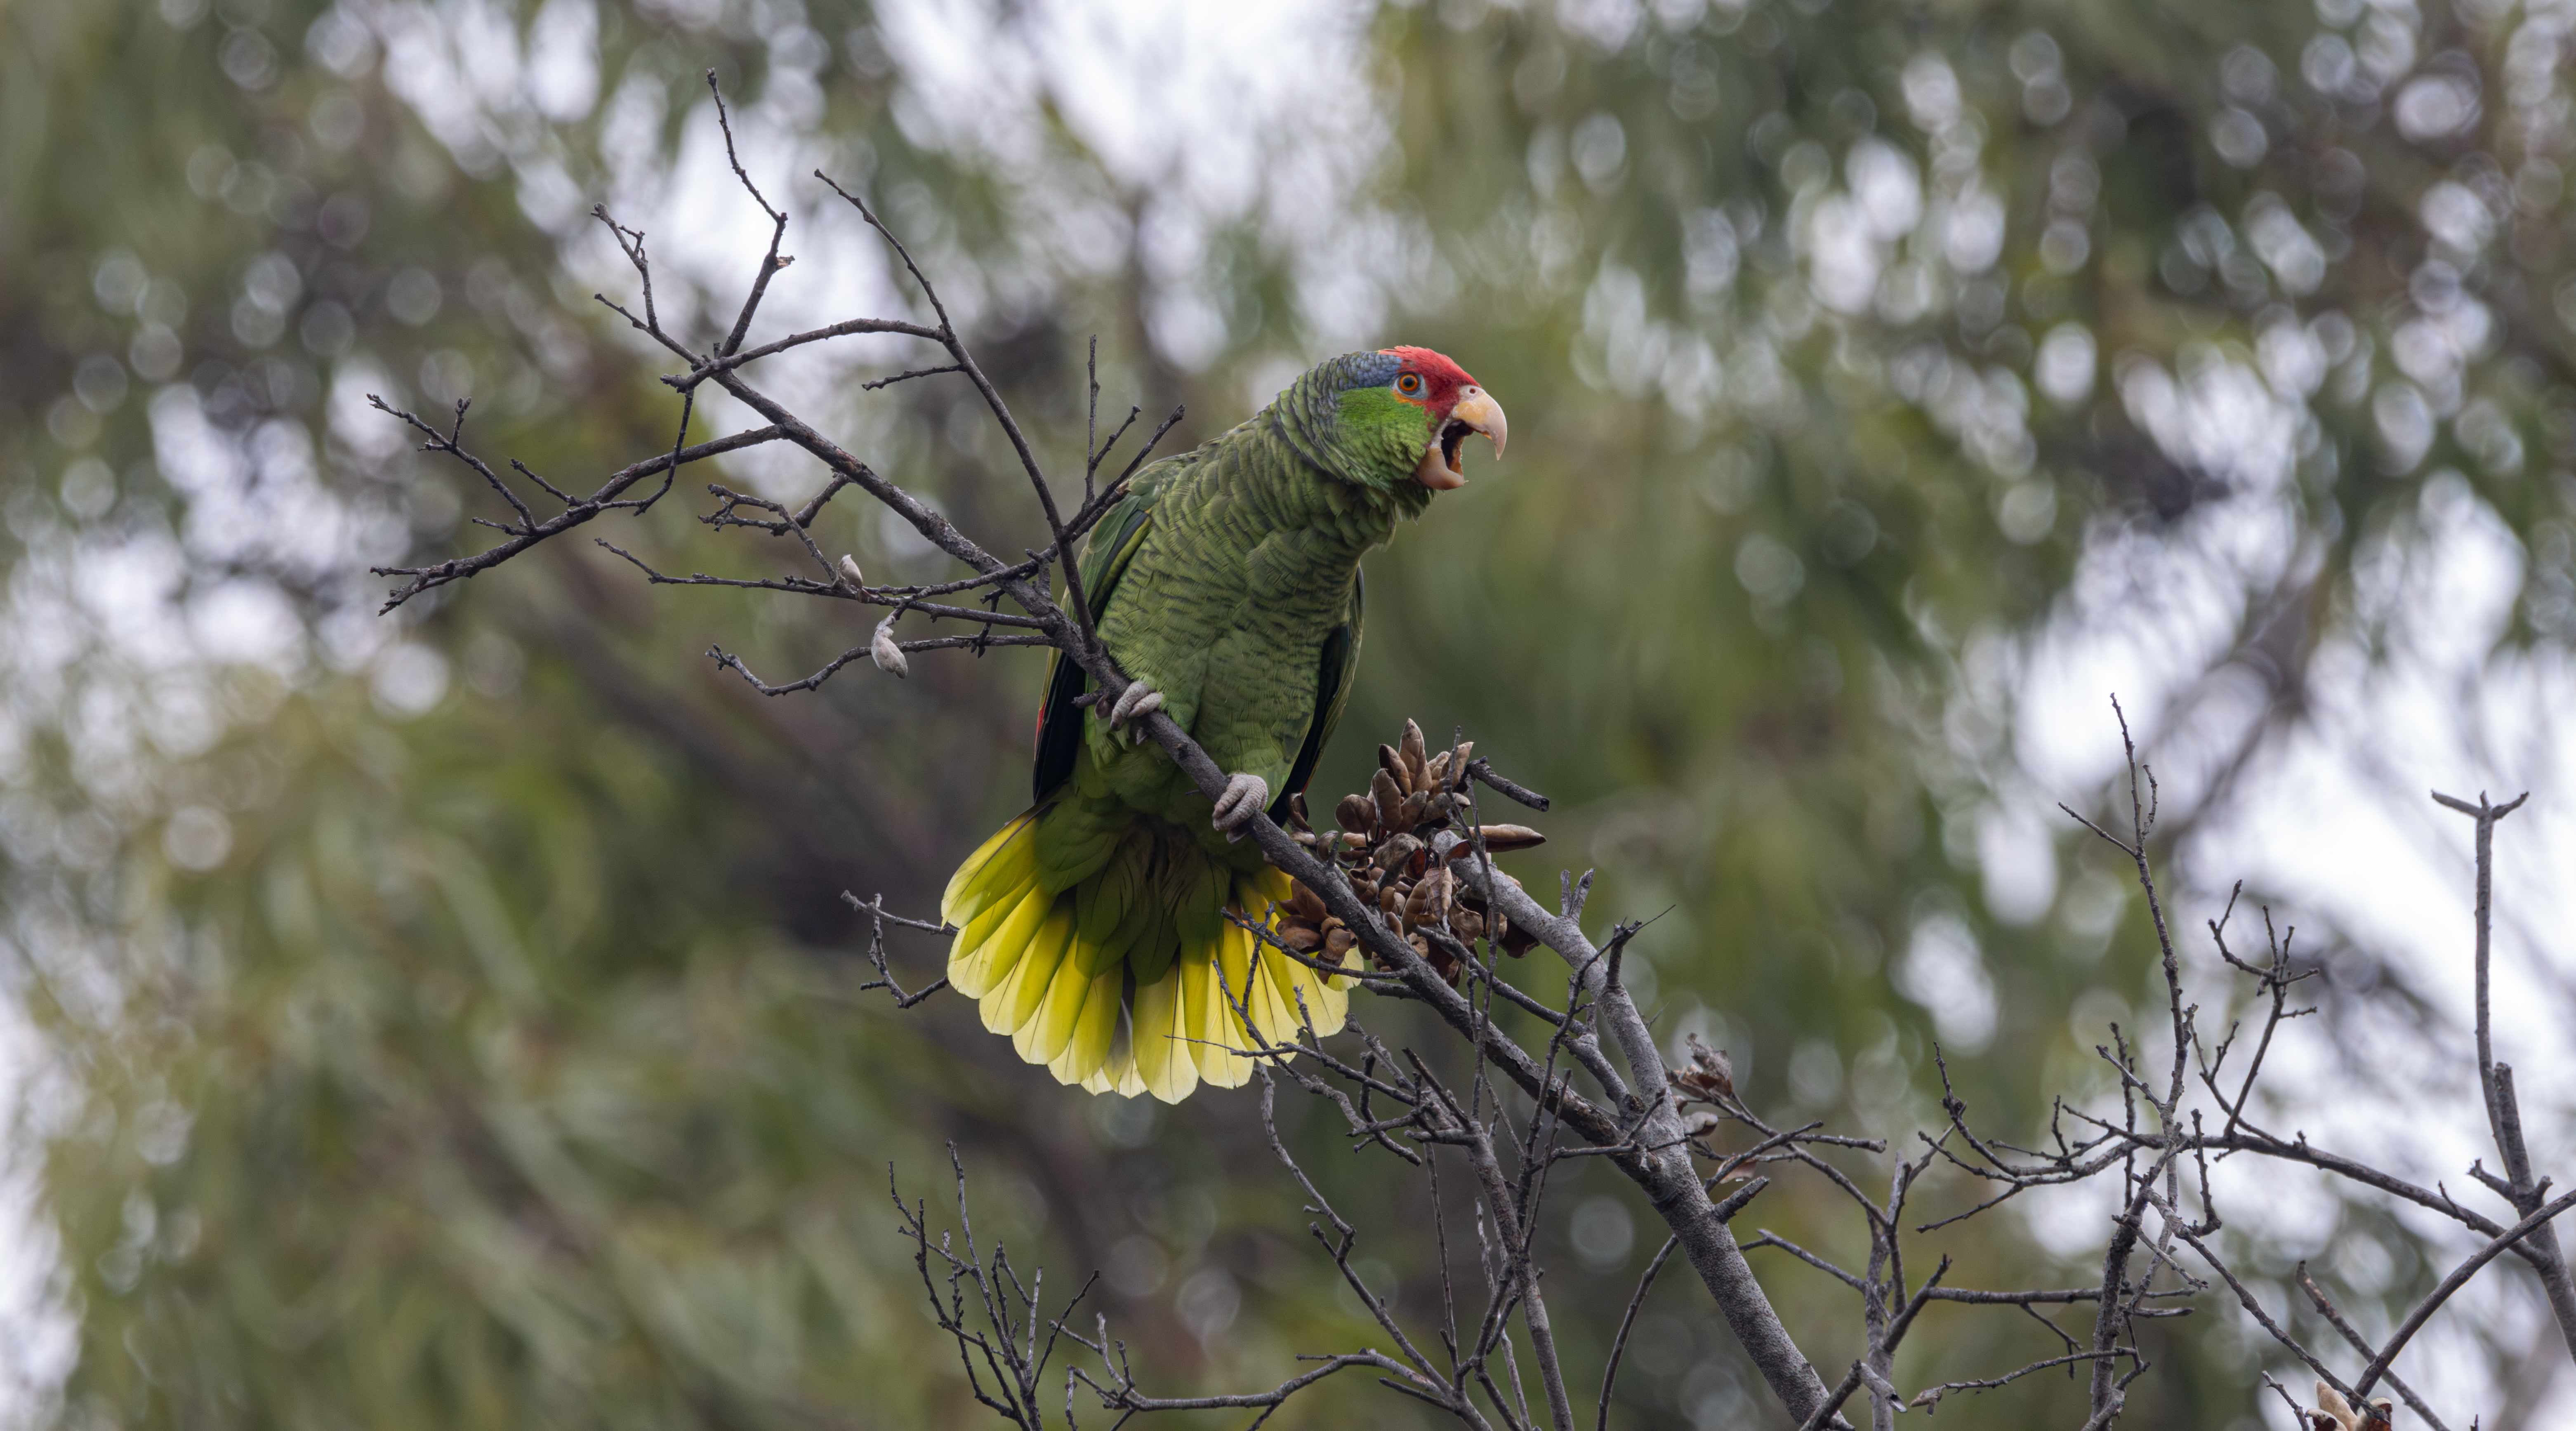 Red crowned parrot perched in a tree